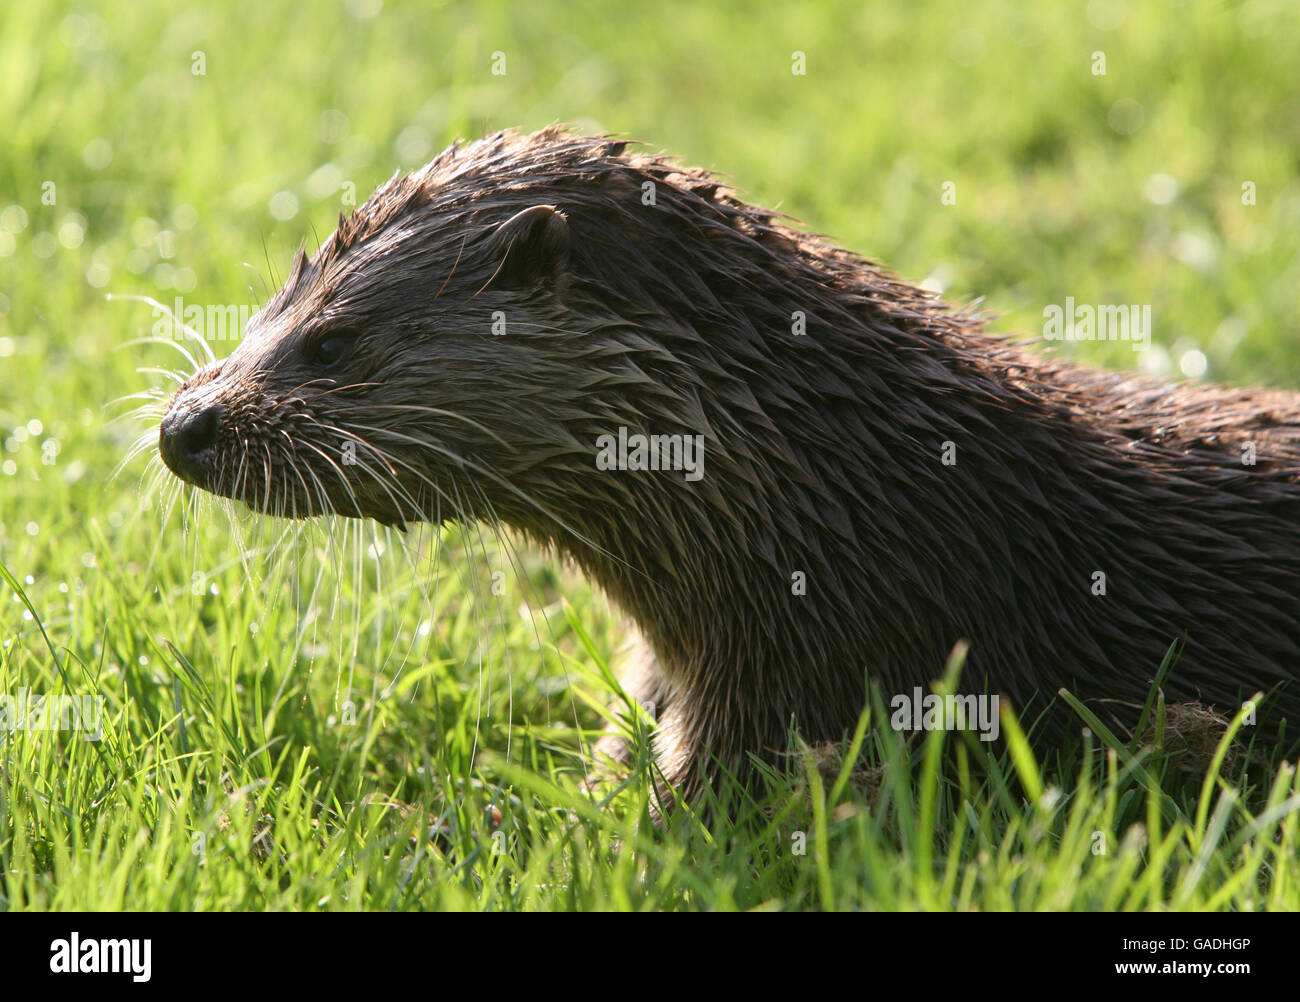 ANIMAL stock. An otter. Picture taken in captivity. Stock Photo